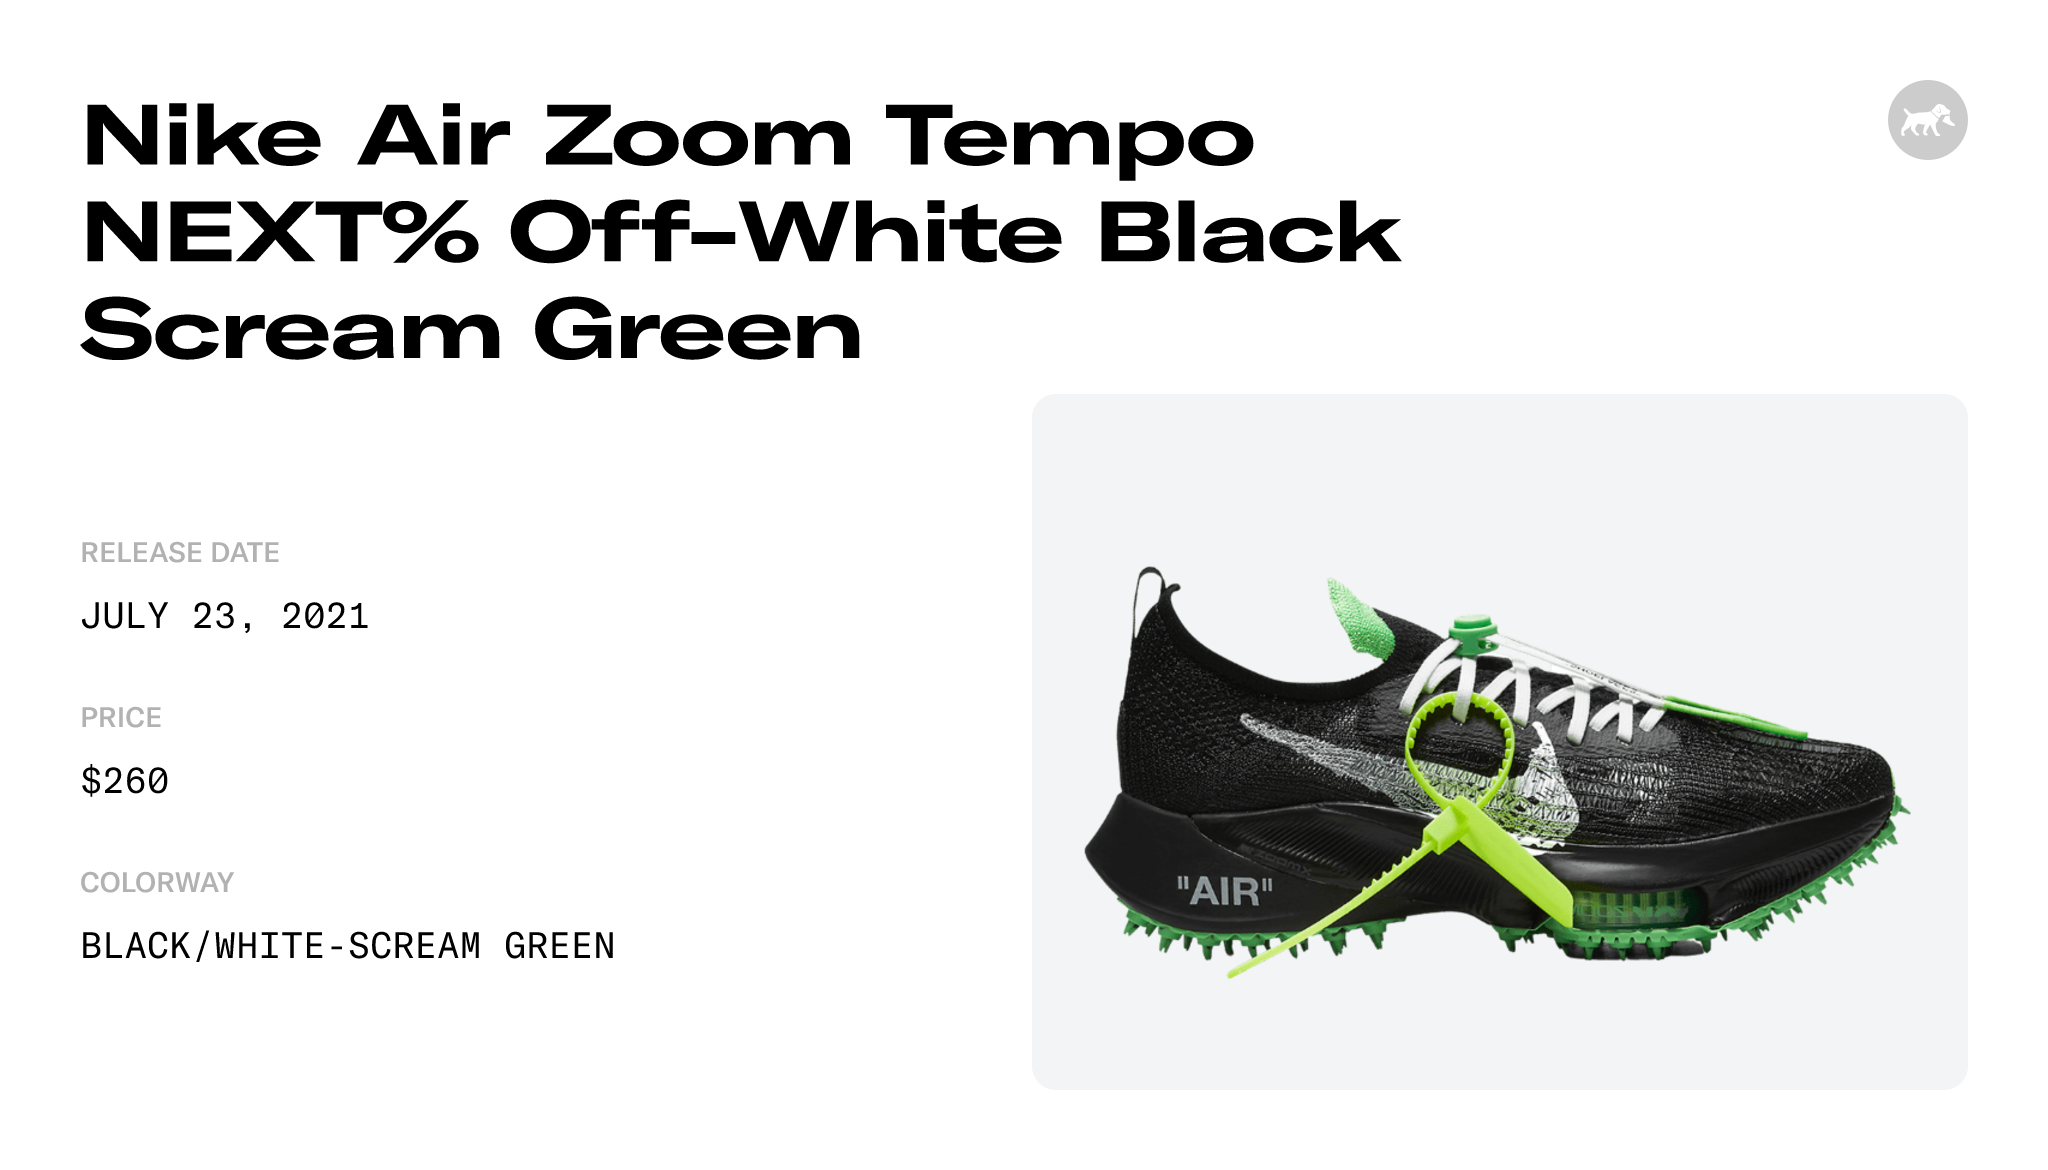 Nike Air Zoom Tempo NEXT% Off-White Black Scream Green - CV0697-001 Raffles  and Release Date